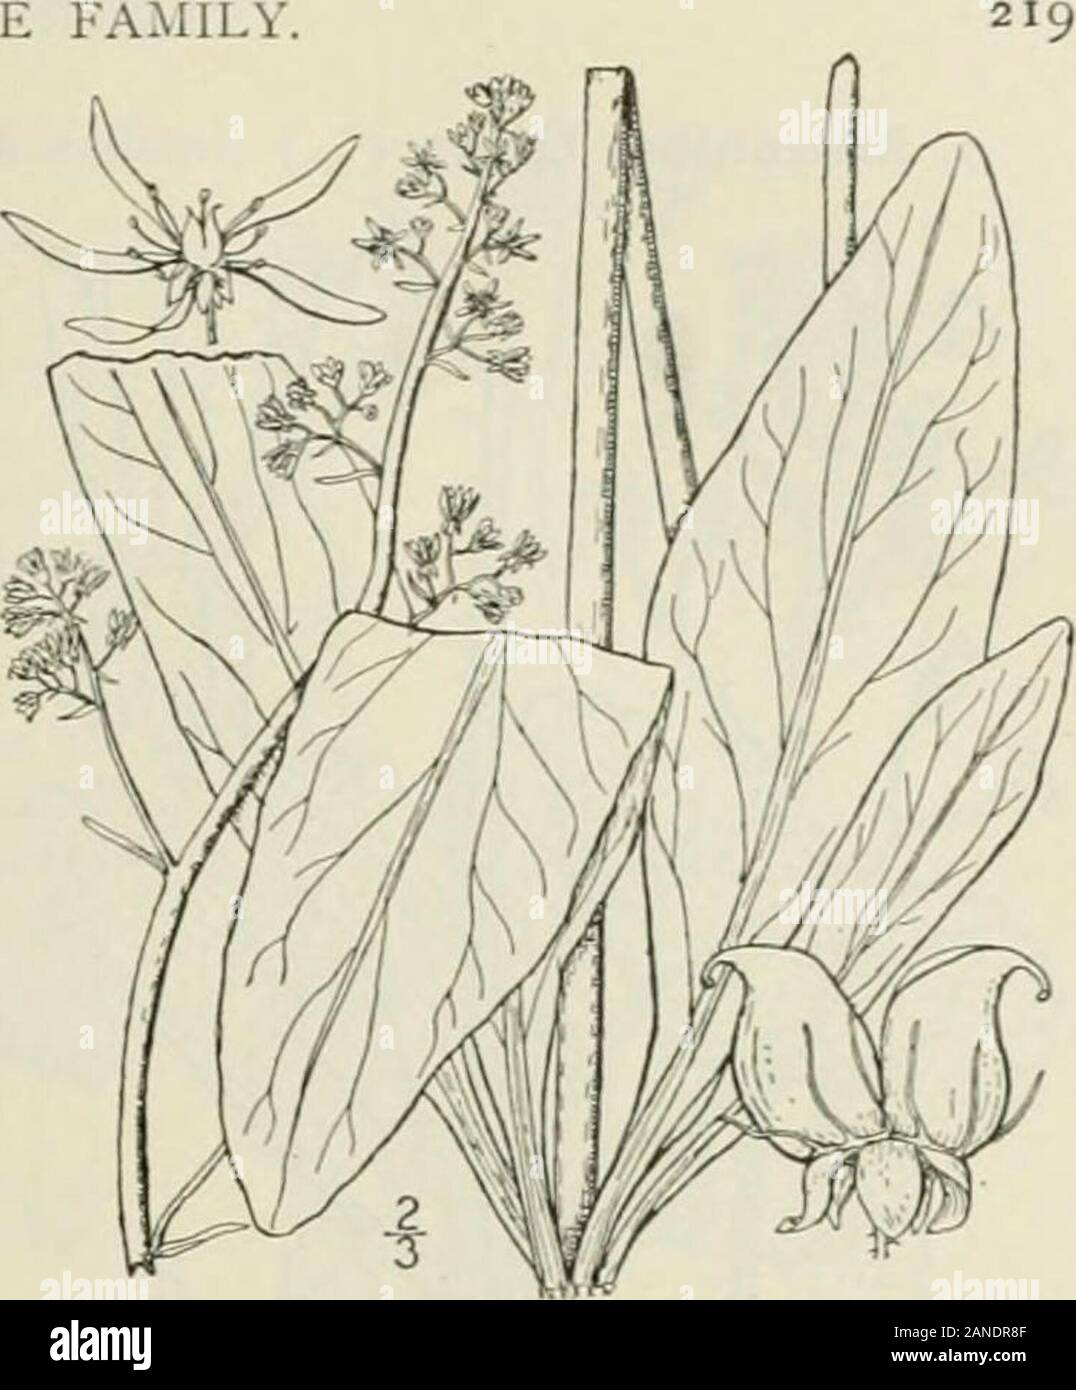 An illustrated flora of the northern United States, Canada and the British possessions : from Newfoundland to the parallel of the southern boundary of Virginia and from the Atlantic Ocean westward to the 102nd meridian; 2nd ed. . 5. Micranthes micranthidifolia (Haw.)Small. Lettuce Sa.xifrage. Fig. 2160. Robertsonia micranthidifolia Haw. Syn. PI. Succ. 322. 1812.Saxifraga erosa Pursh, Fl. Am. Sept. 311. 1814.S. micranthuiifolia B.S.P. Prel. Cat. N. Y. 17. 1888.M. micranlhiiiifoiia Small. Fl. SE. U. S. 501. 1903. Scape rather slender, more or less viscid,l°-3° high, bracted above. Leaves oblance Stock Photo